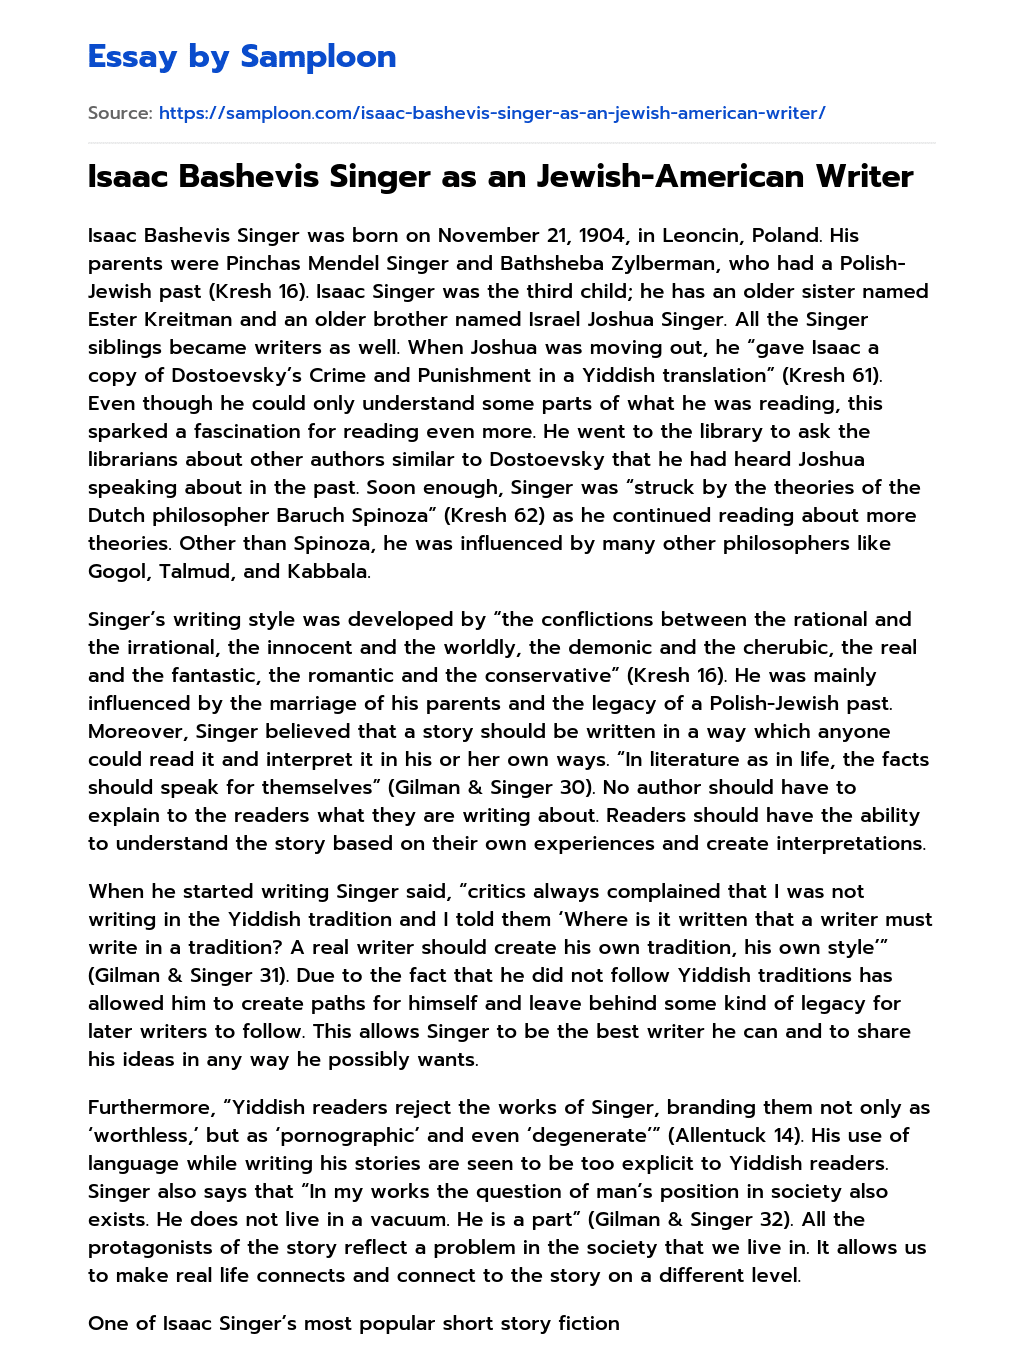 Isaac Bashevis Singer as an Jewish-American Writer essay